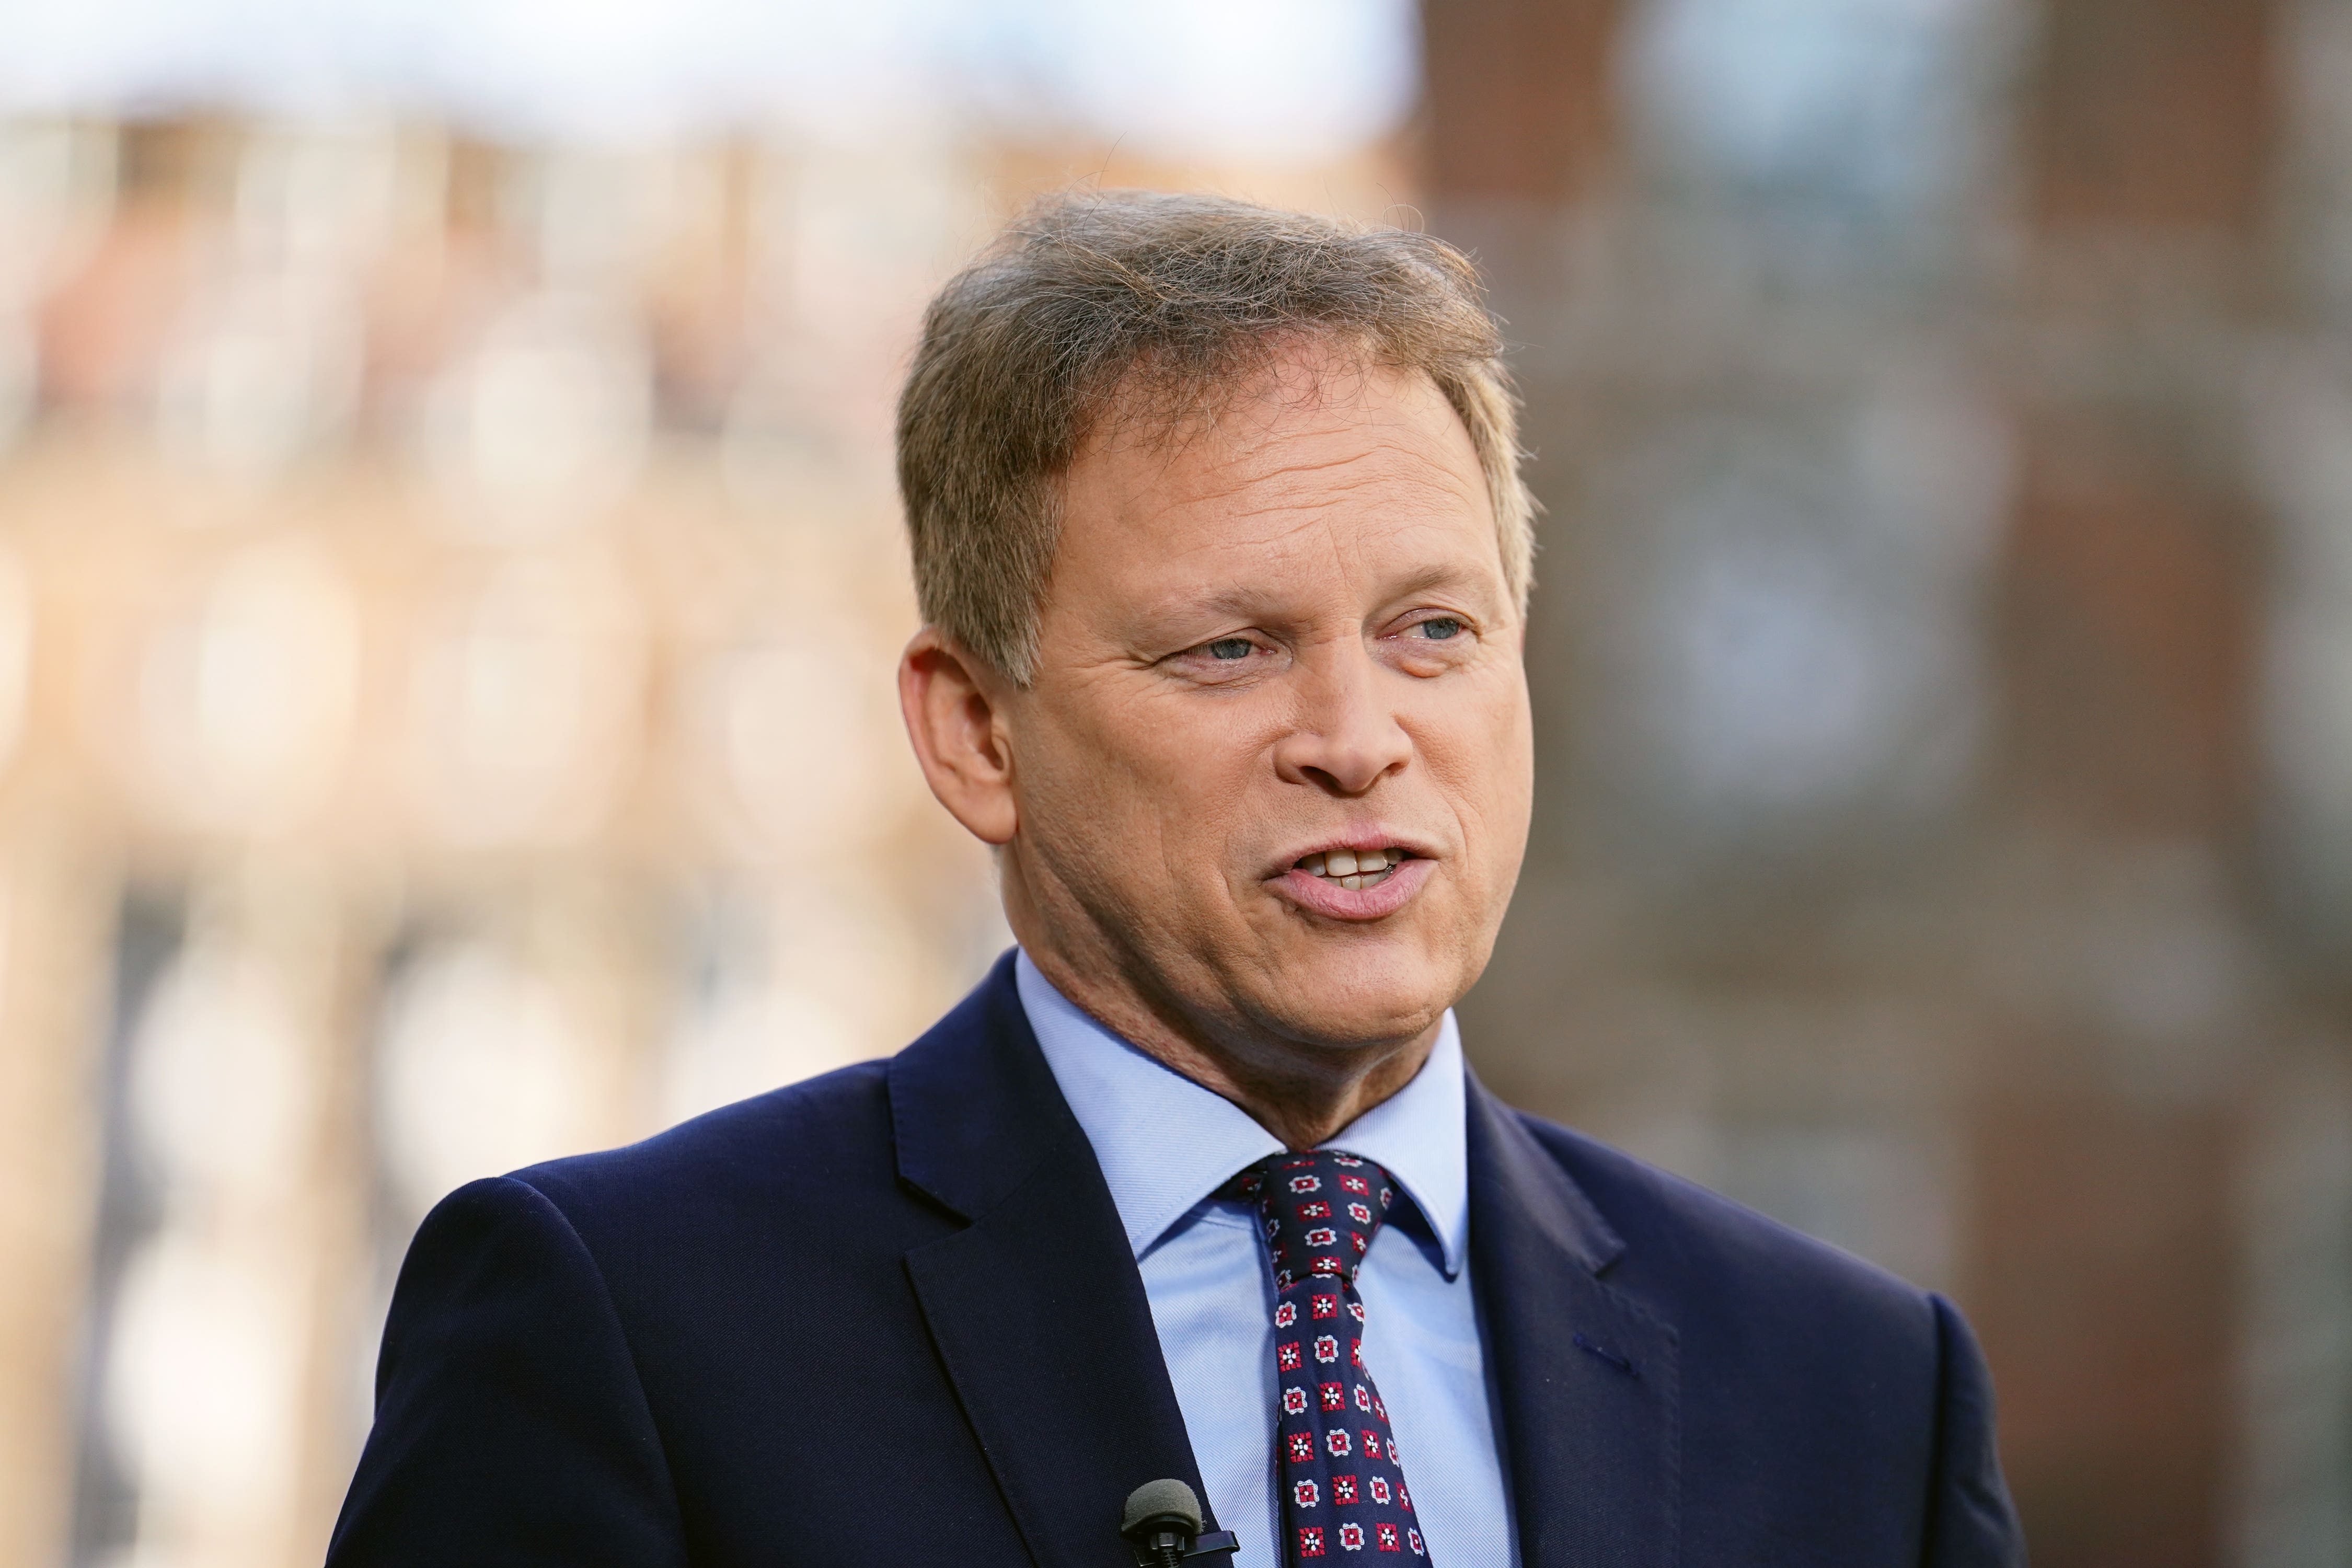 Grant Shapps said the UK needs more nuclear and renewables to become more energy independent (Jordan Pettitt/PA)